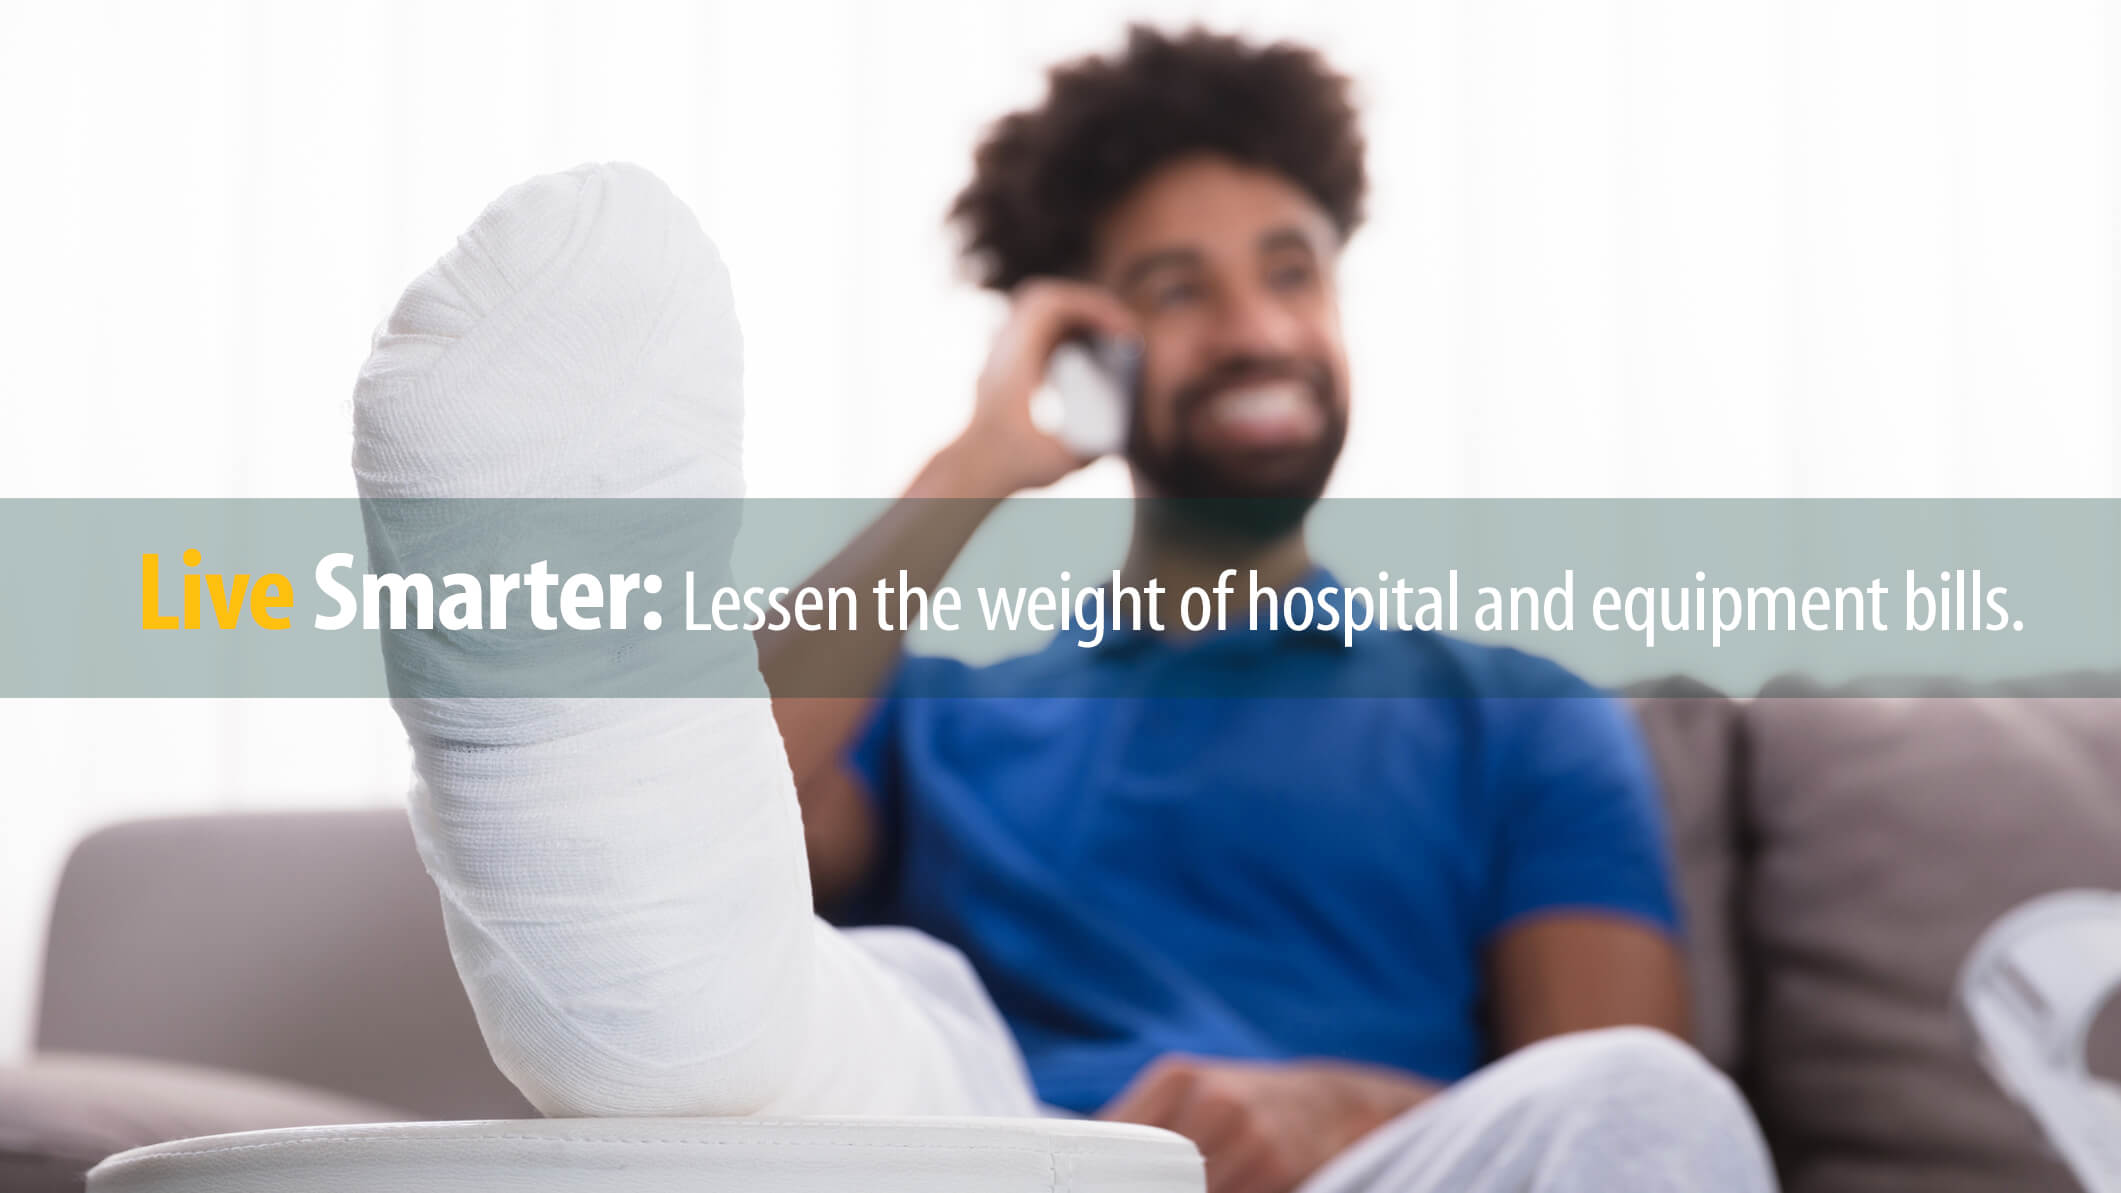 Patient with cast on foot talks happily on phone, knowing his bills will be manageable.